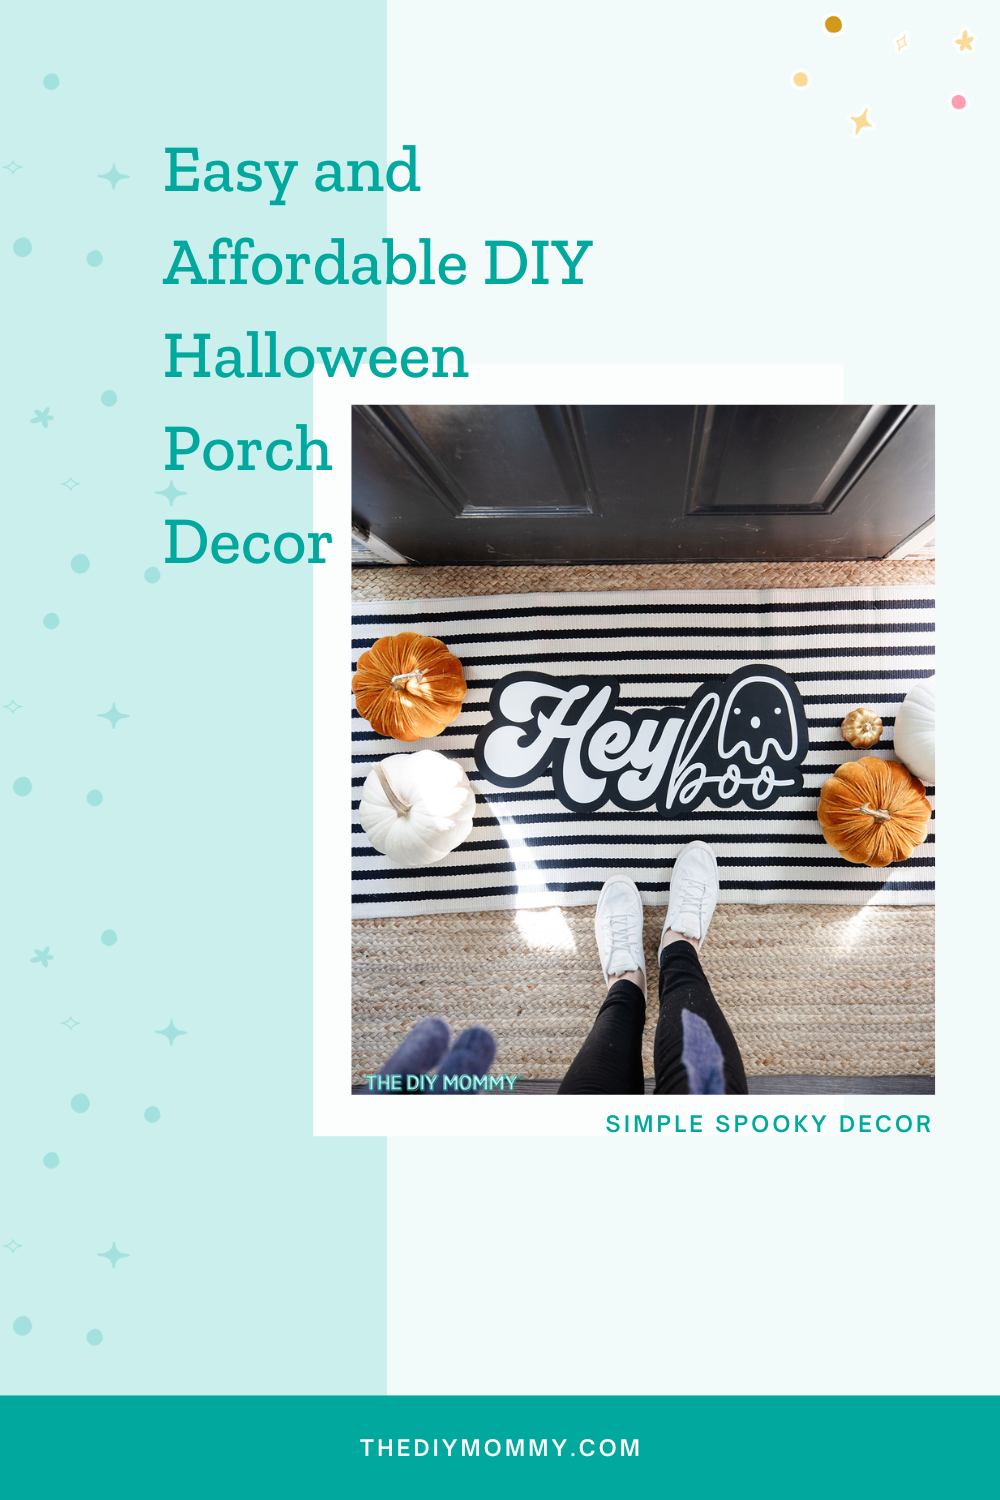 Pinterest pin for Easy and Affordable DIY Halloween Porch Decor